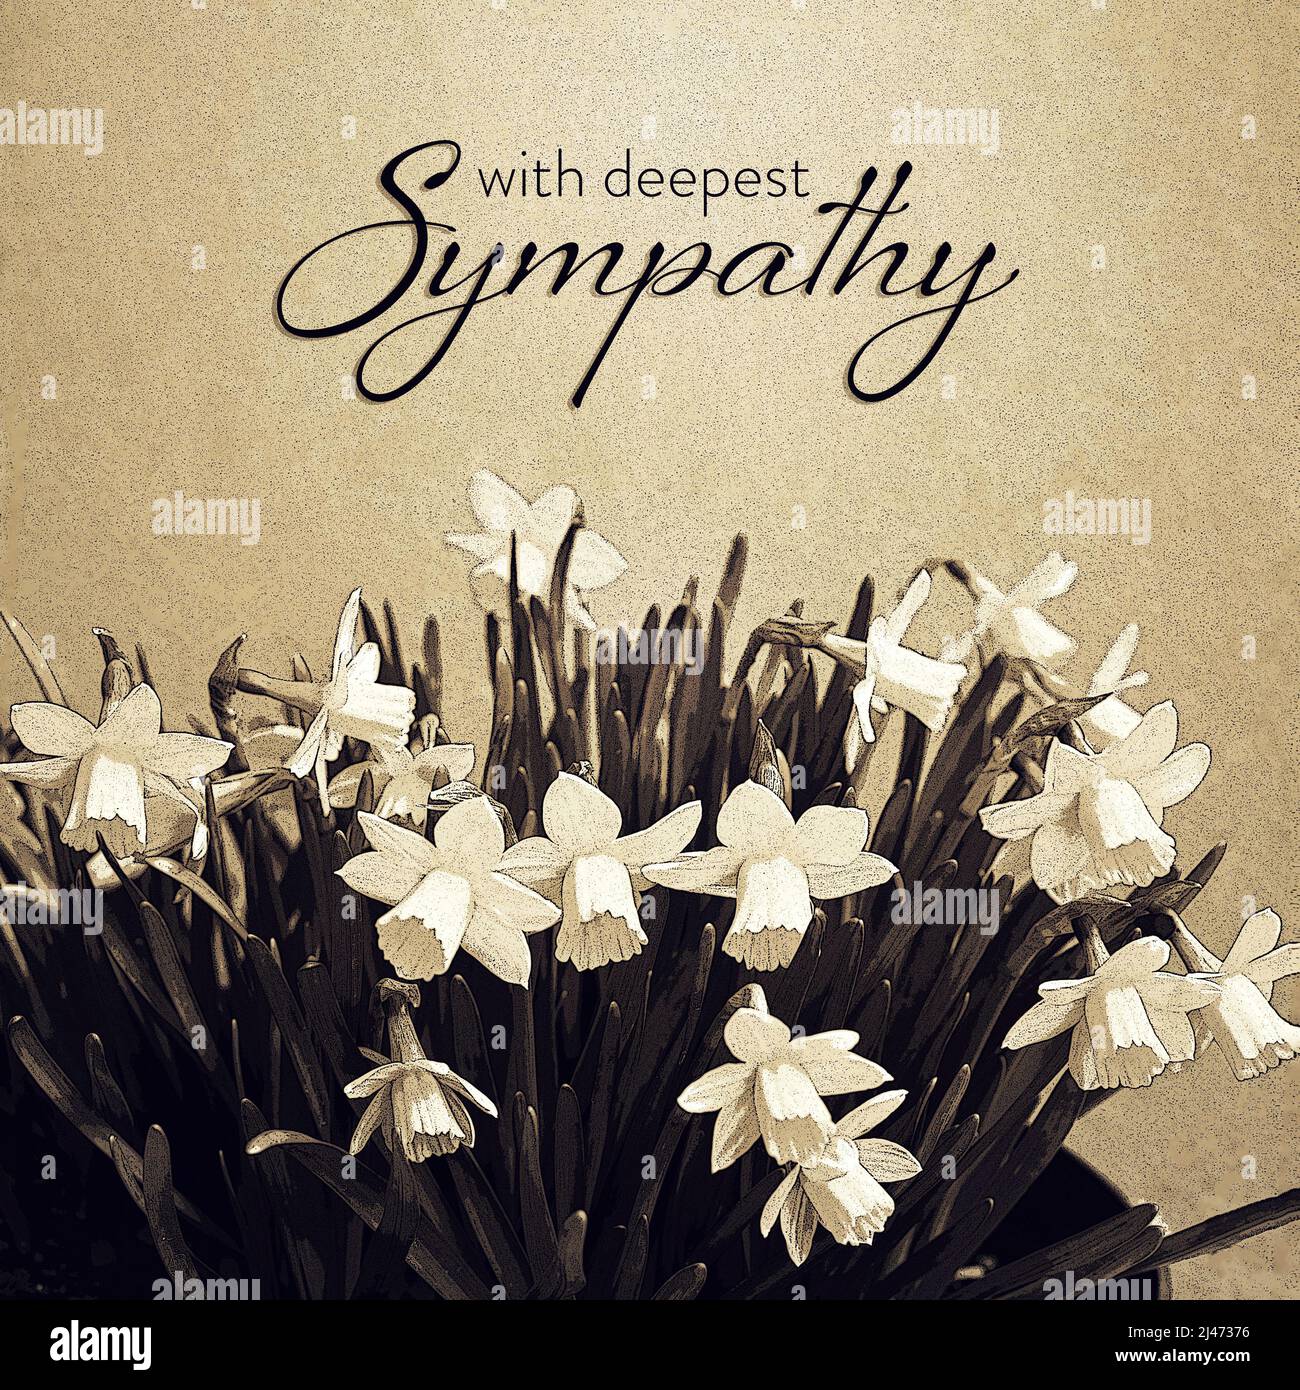 Sympathy card with daffodils illustration Stock Photo